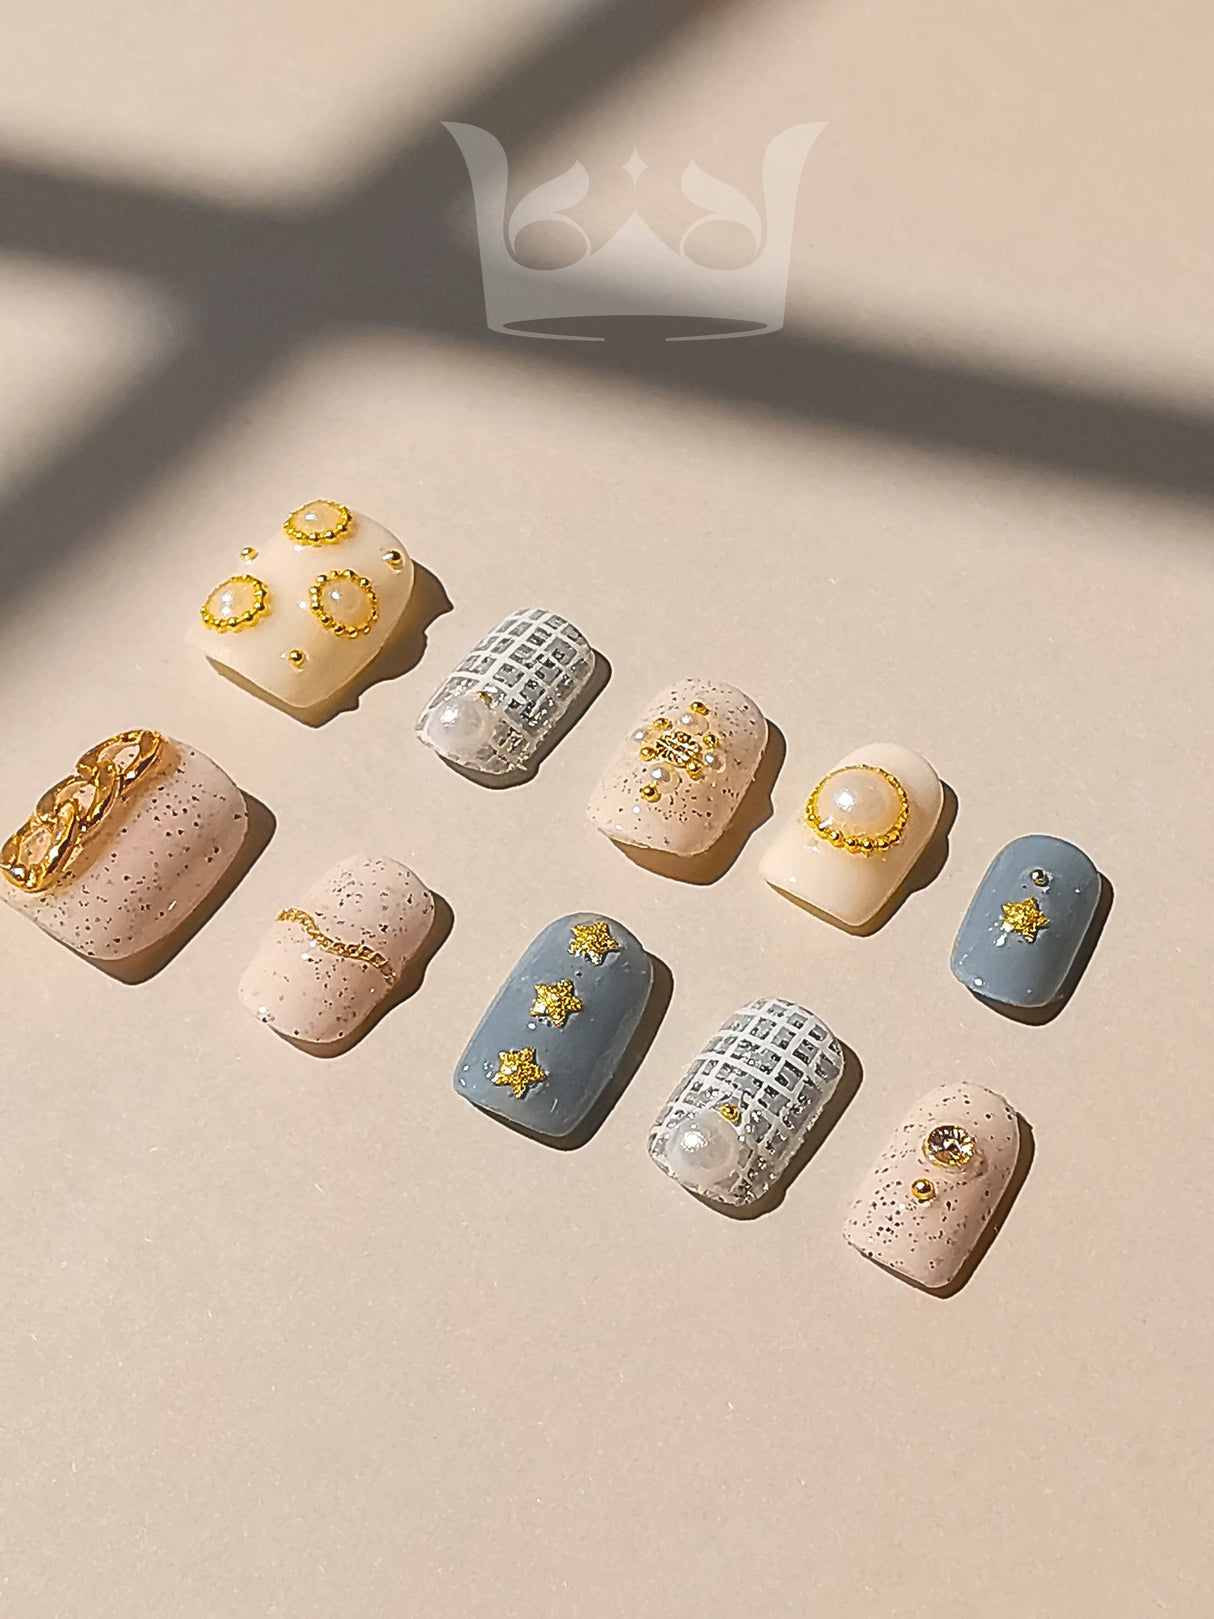 The input description lacks information about the use case and design of nails. The image displays fashionable rings for those who prefer modern and high-end jewelry.